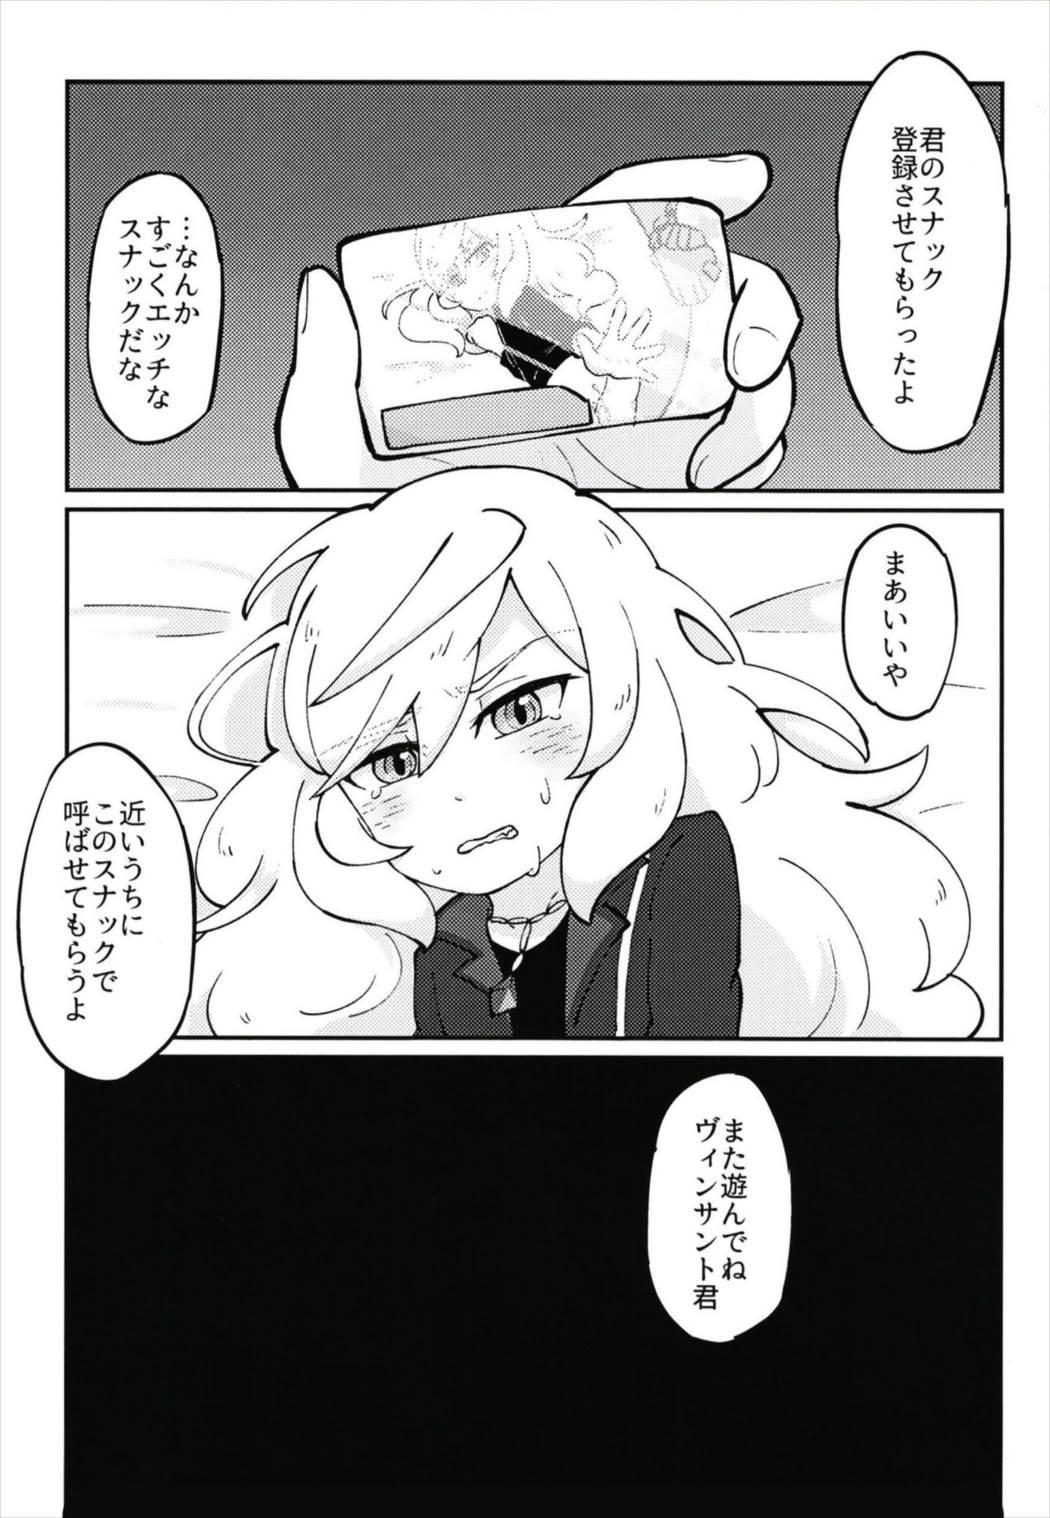 Celebrity Sex Scene ハメドリスナック Hot Teen - Page 5